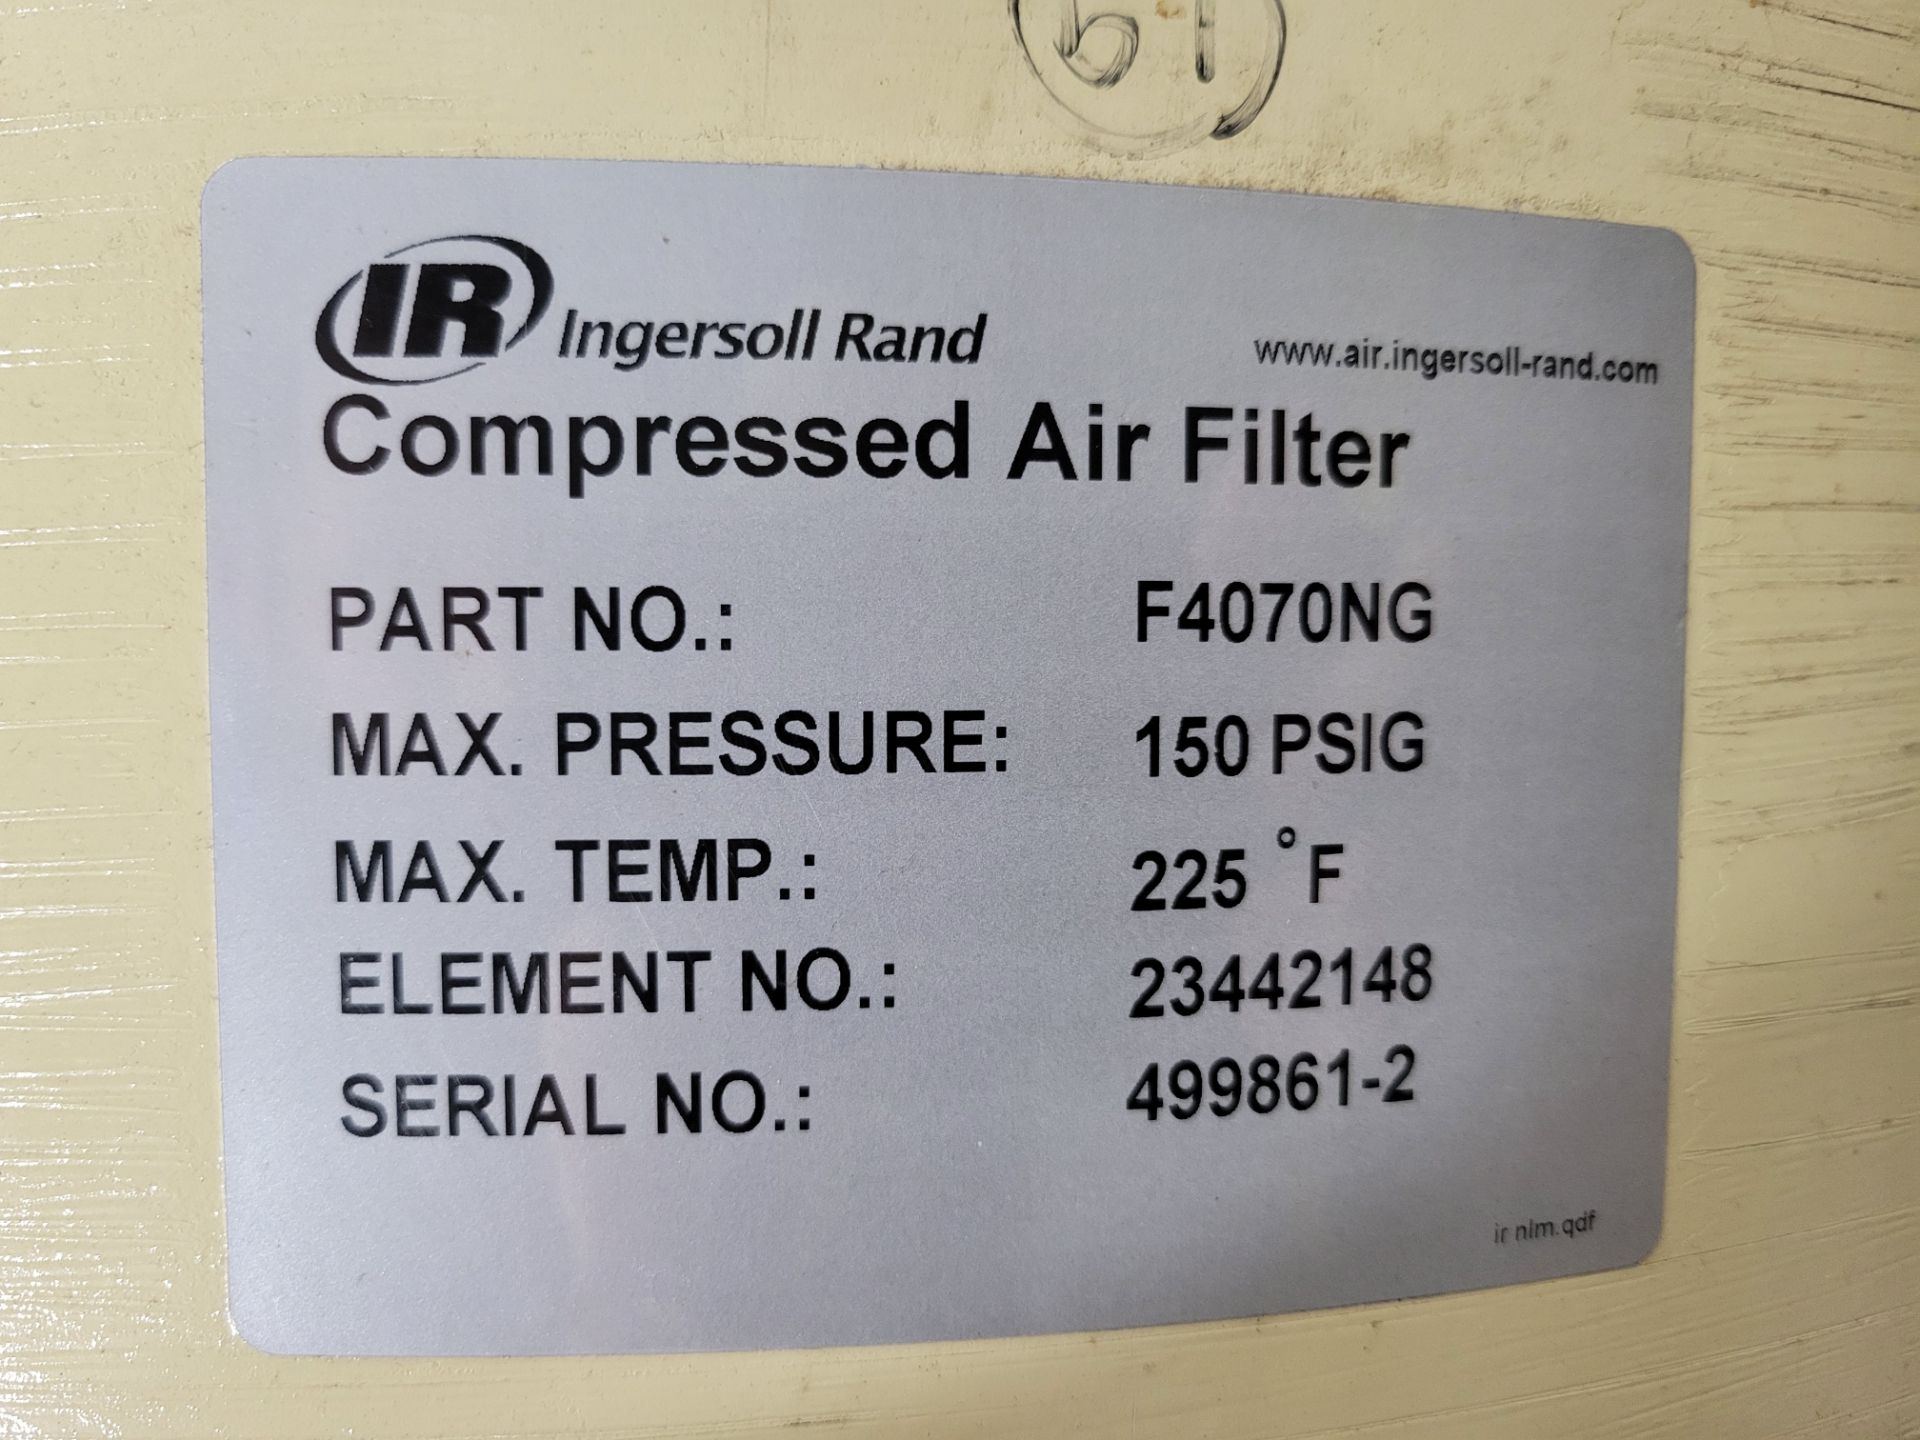 Two Ingersoll Rand Compressed Air Filter Tanks - Image 4 of 7